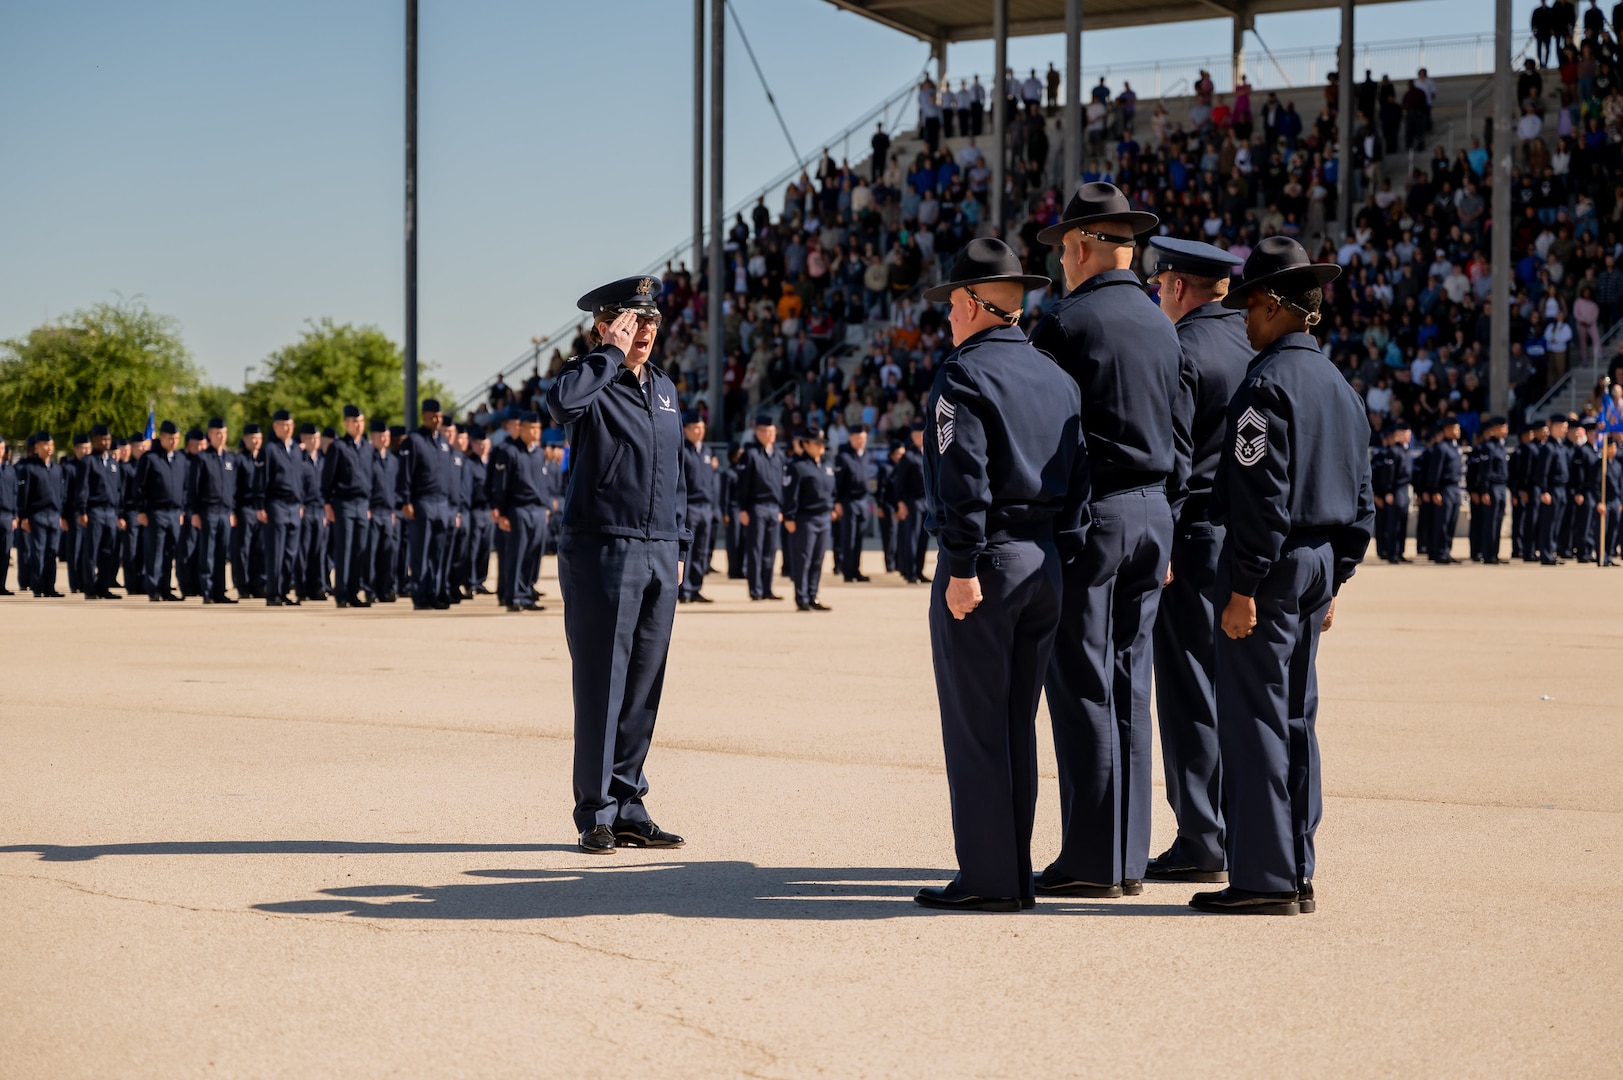 Col. Lauren Courchaine, 37thTraining Wing commander, salutes the flag during the April 3, 2024, Airman’s Coin & Retreat Ceremony at Joint Base San Antonio-Lackland, Texas. More than 500 Airmen graduated from Basic Military Training where Courchaine served as the Commander of Airmen for the retreat ceremony. Courchaine is changing command May 30 and will move into her new role as the Senior Military Assistant to the Under Secretary of the Air Force at the Pentagon, Washington D.C. (U.S. Air Force photo by Gregory T. Walker)